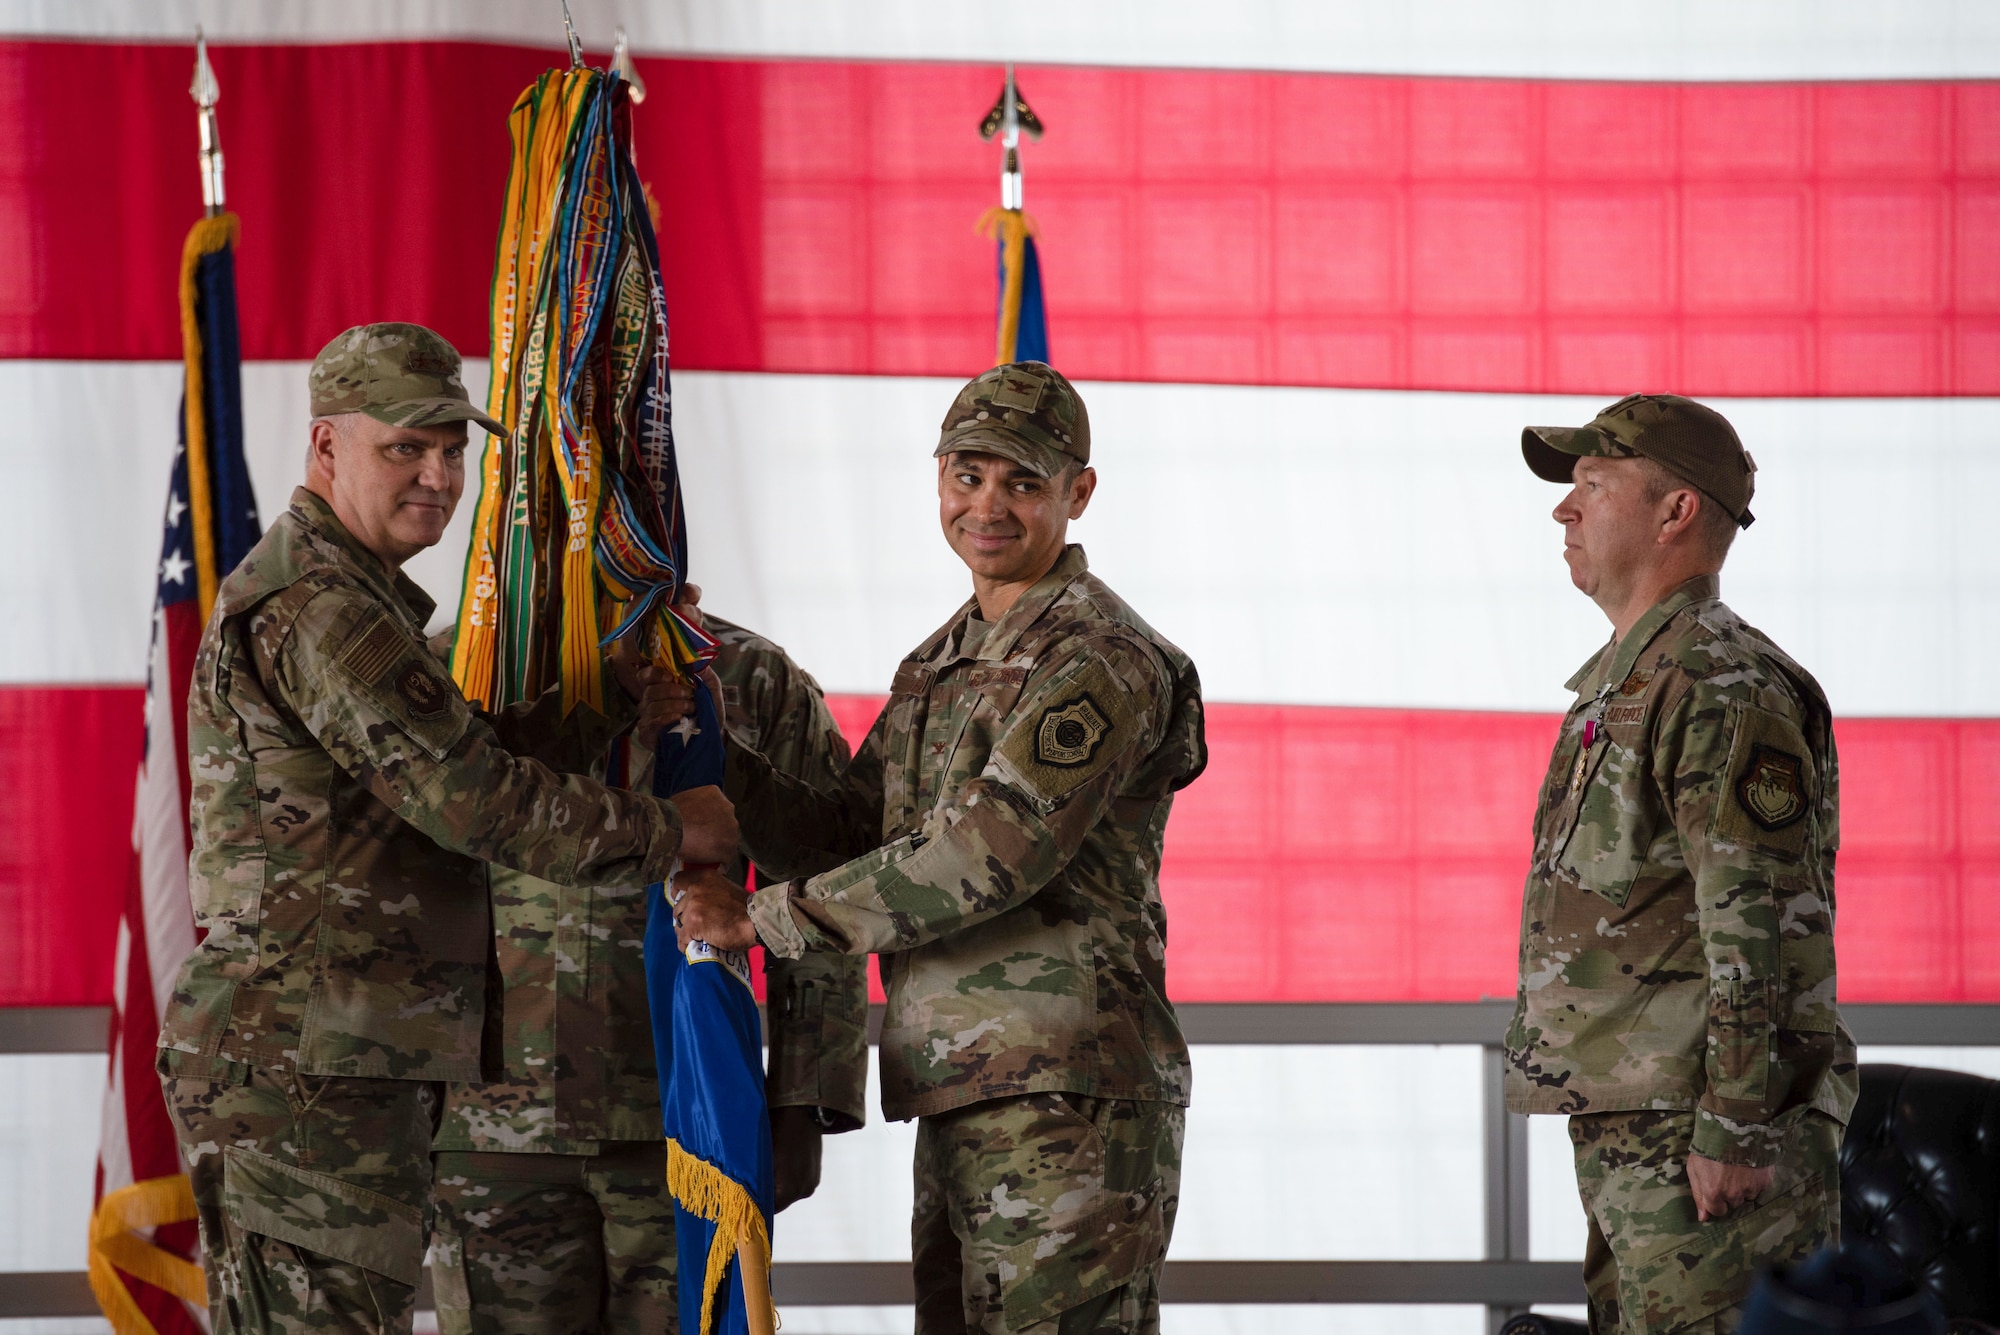 Maj. Gen. Michael Koscheski poses handing the guidon to Col. Michael Alfaro after the flag was taken from Col. Ernesto DiVittorio, signifying the passing of command.